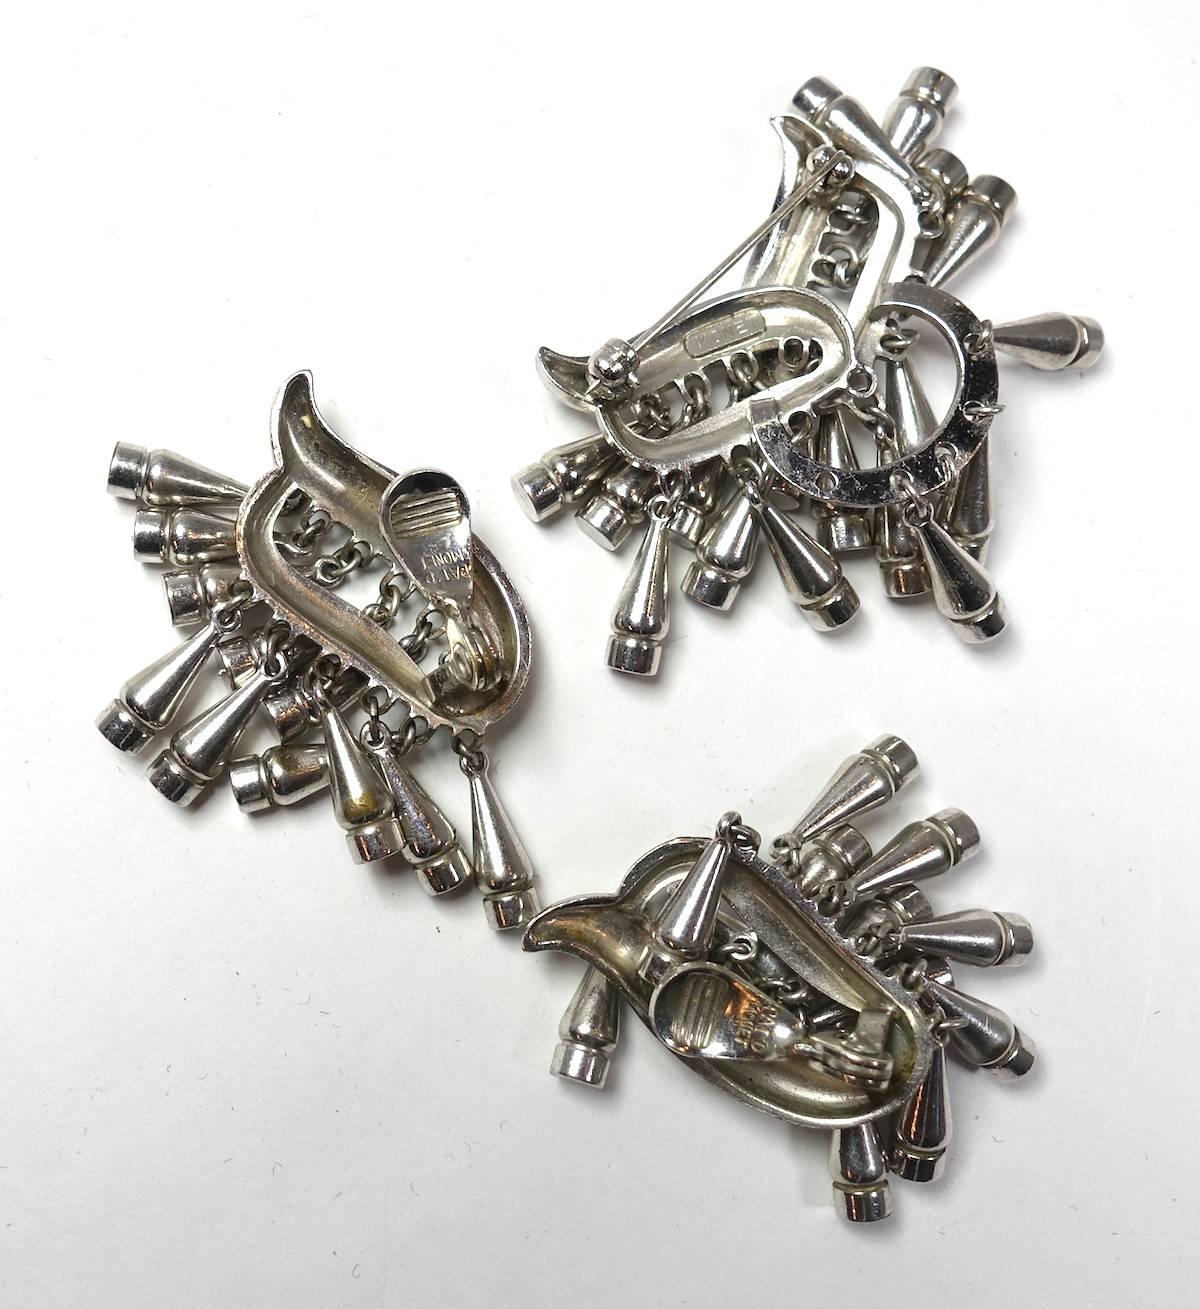 This vintage signed Monet set features multiple bottle-shaped drops in a silver-plated base metal setting.  The brooch measures 1-1/2” x 1-1/4”. The matching clip earrings are 2” x 1”.  This vintage set is signed “Monet” and is in excellent